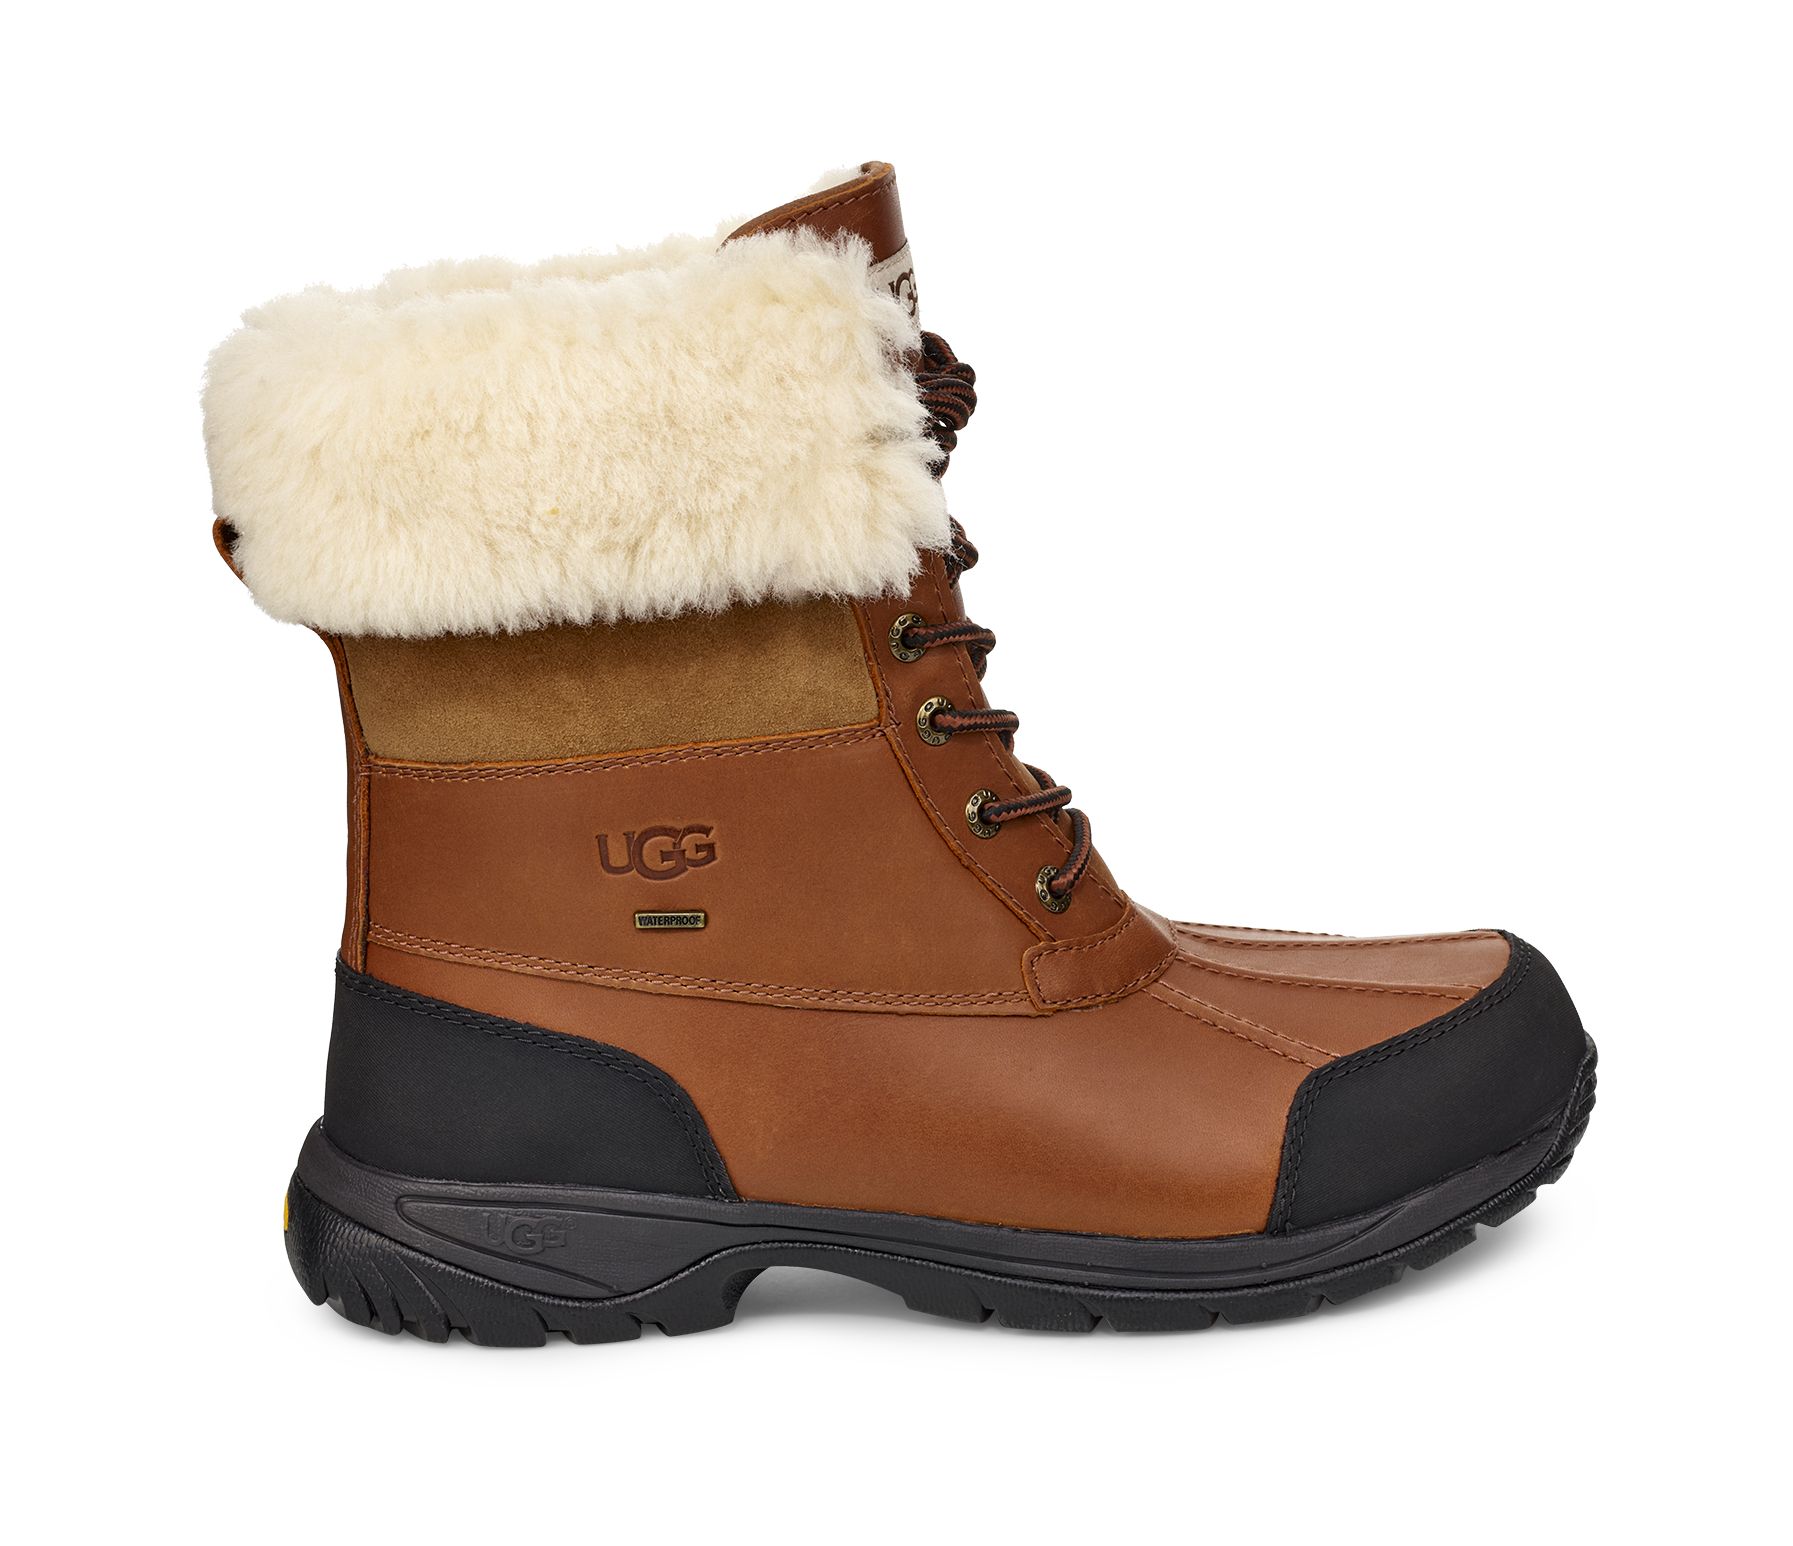 UGG Men's Butte Waterproof Leather Snow Boots in Brown, Size 10.5 | UGG (US)